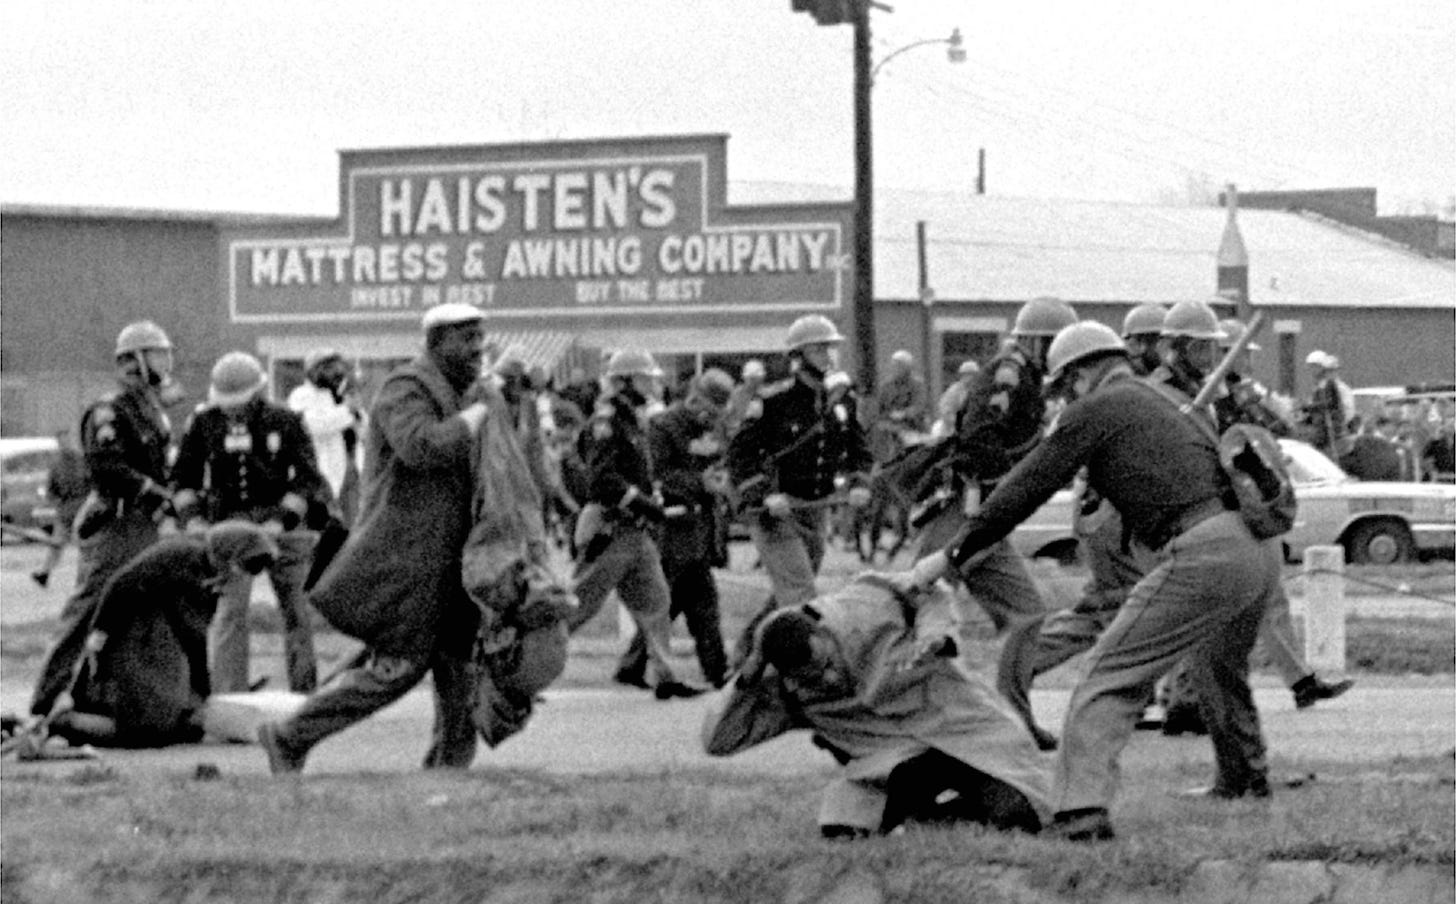 50 Years After March On Washington, John Lewis Still Fights | KUNC